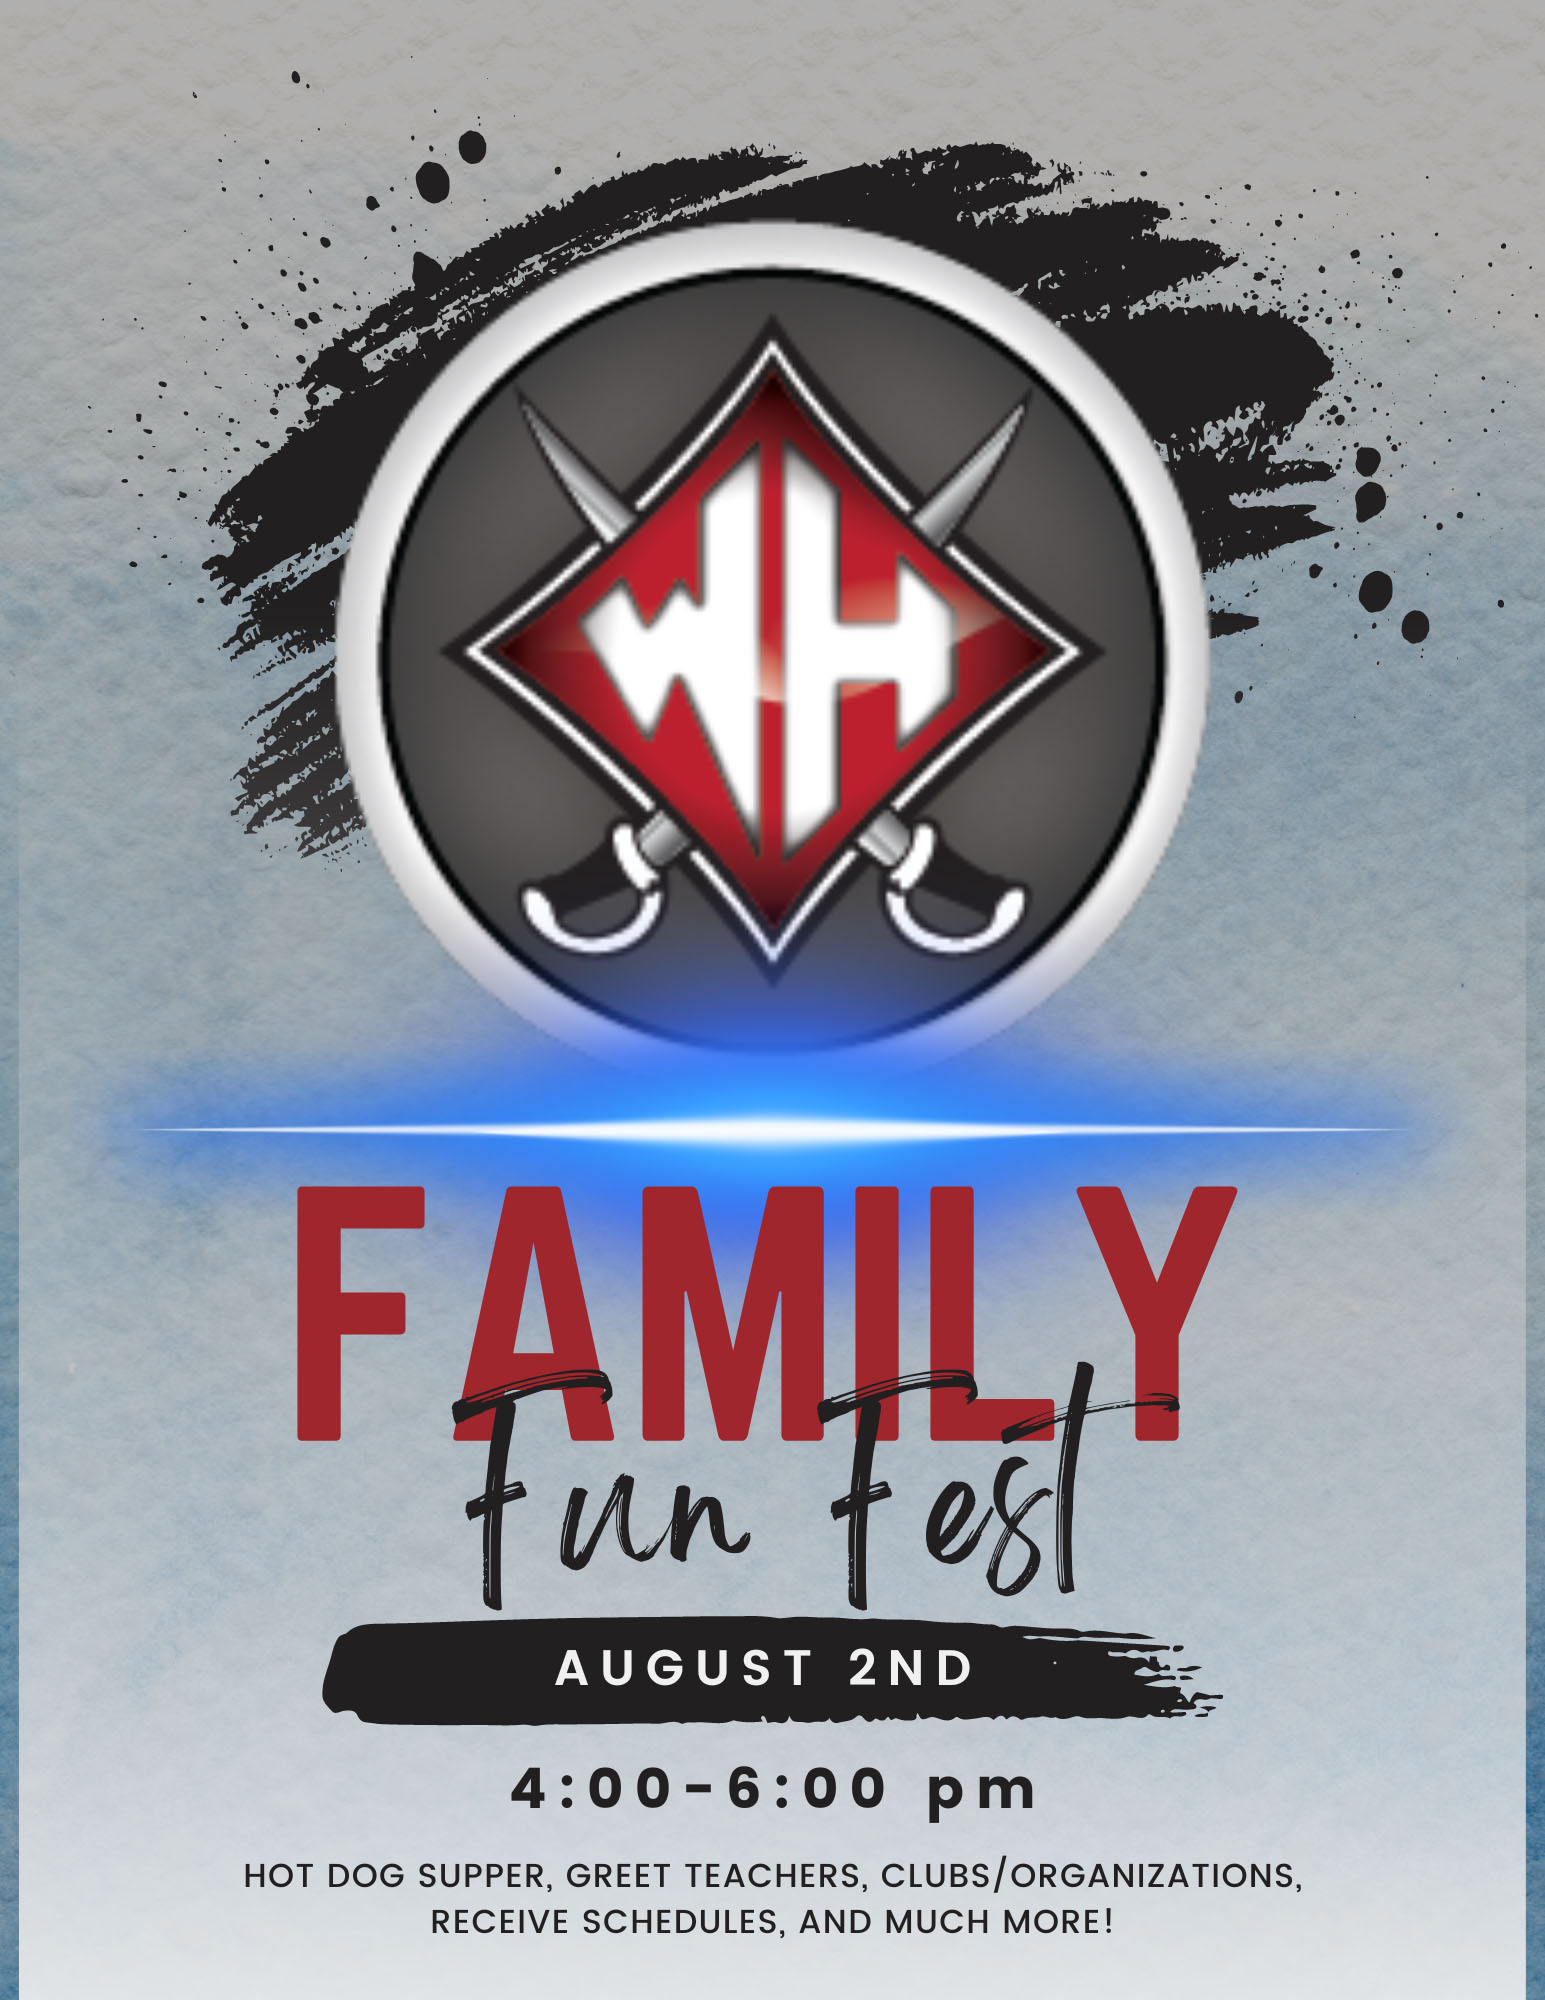 The Wade Hampton logo with the words Family Fun Fest below. August 2nd, 4pm to 6pm. Hot dog supper, greet teachers, clubs/organizations, receive schedules, and much more!